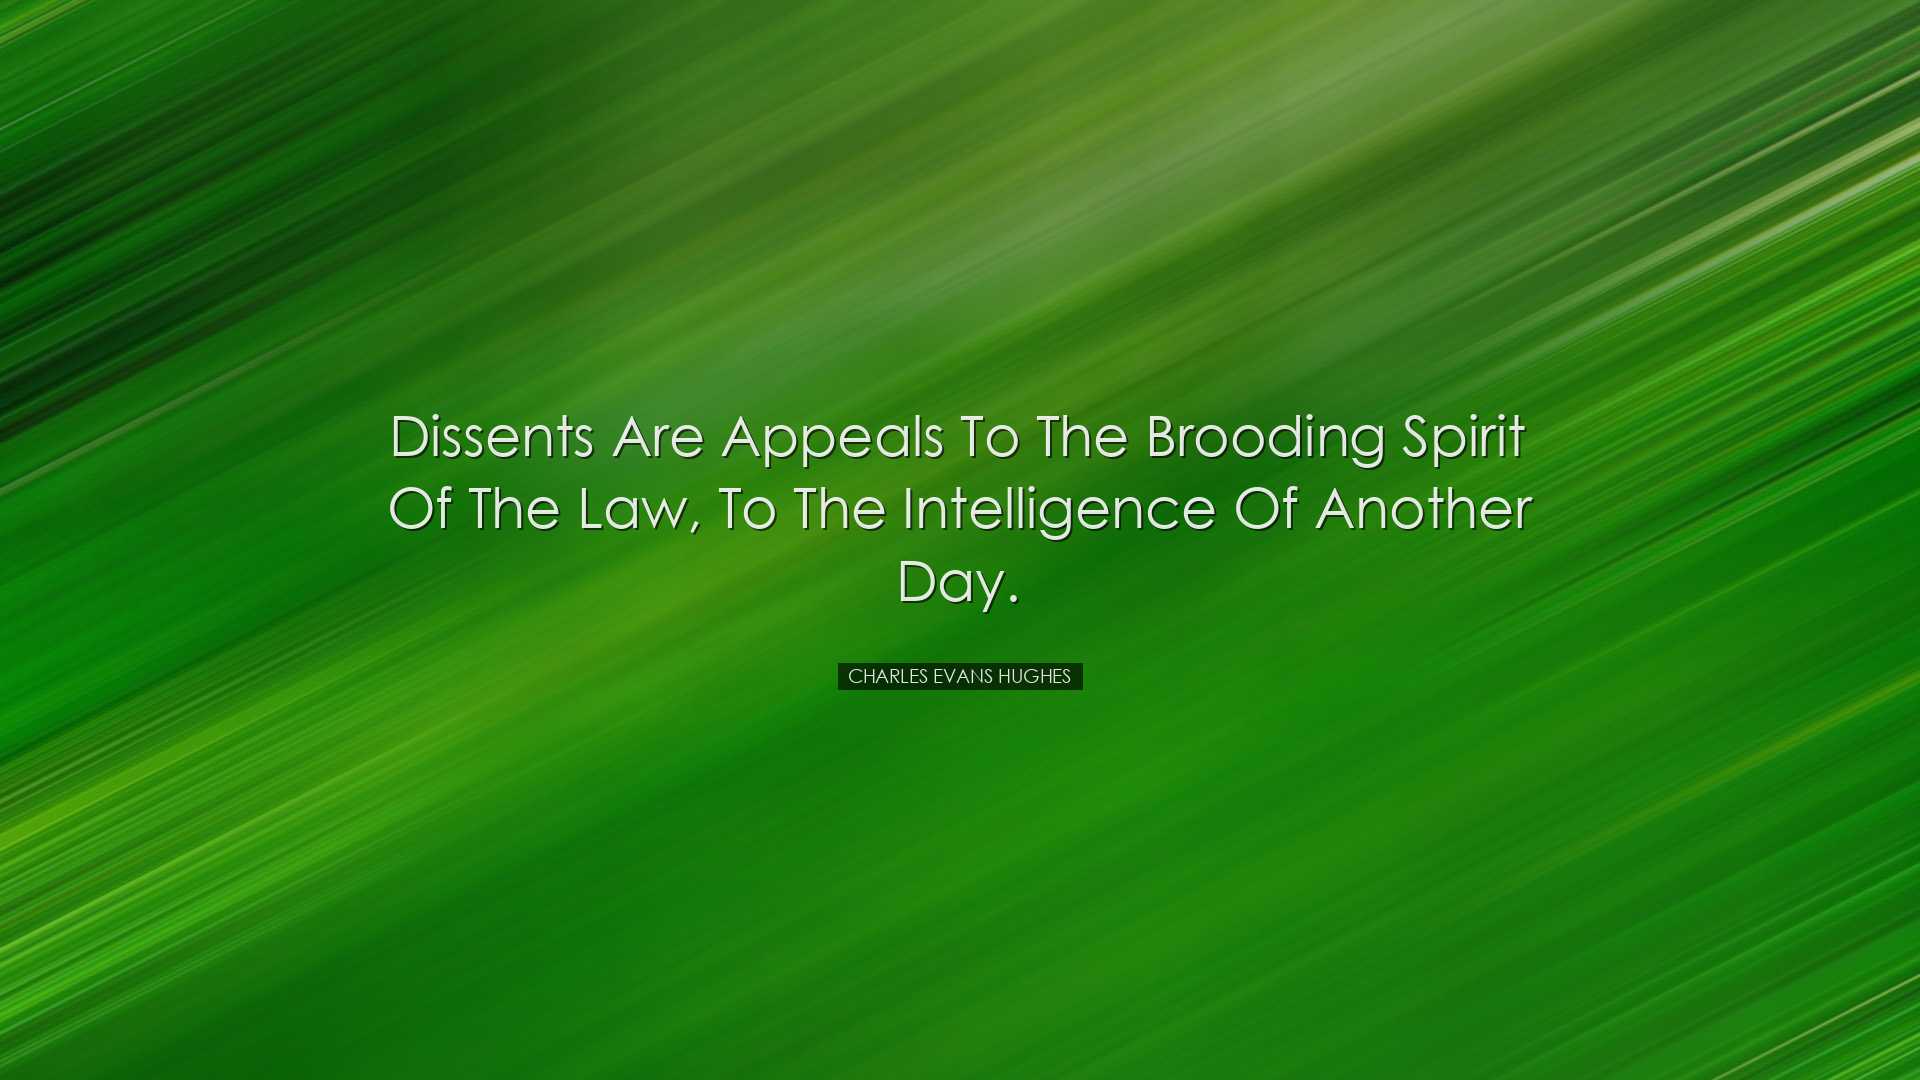 Dissents are appeals to the brooding spirit of the law, to the int